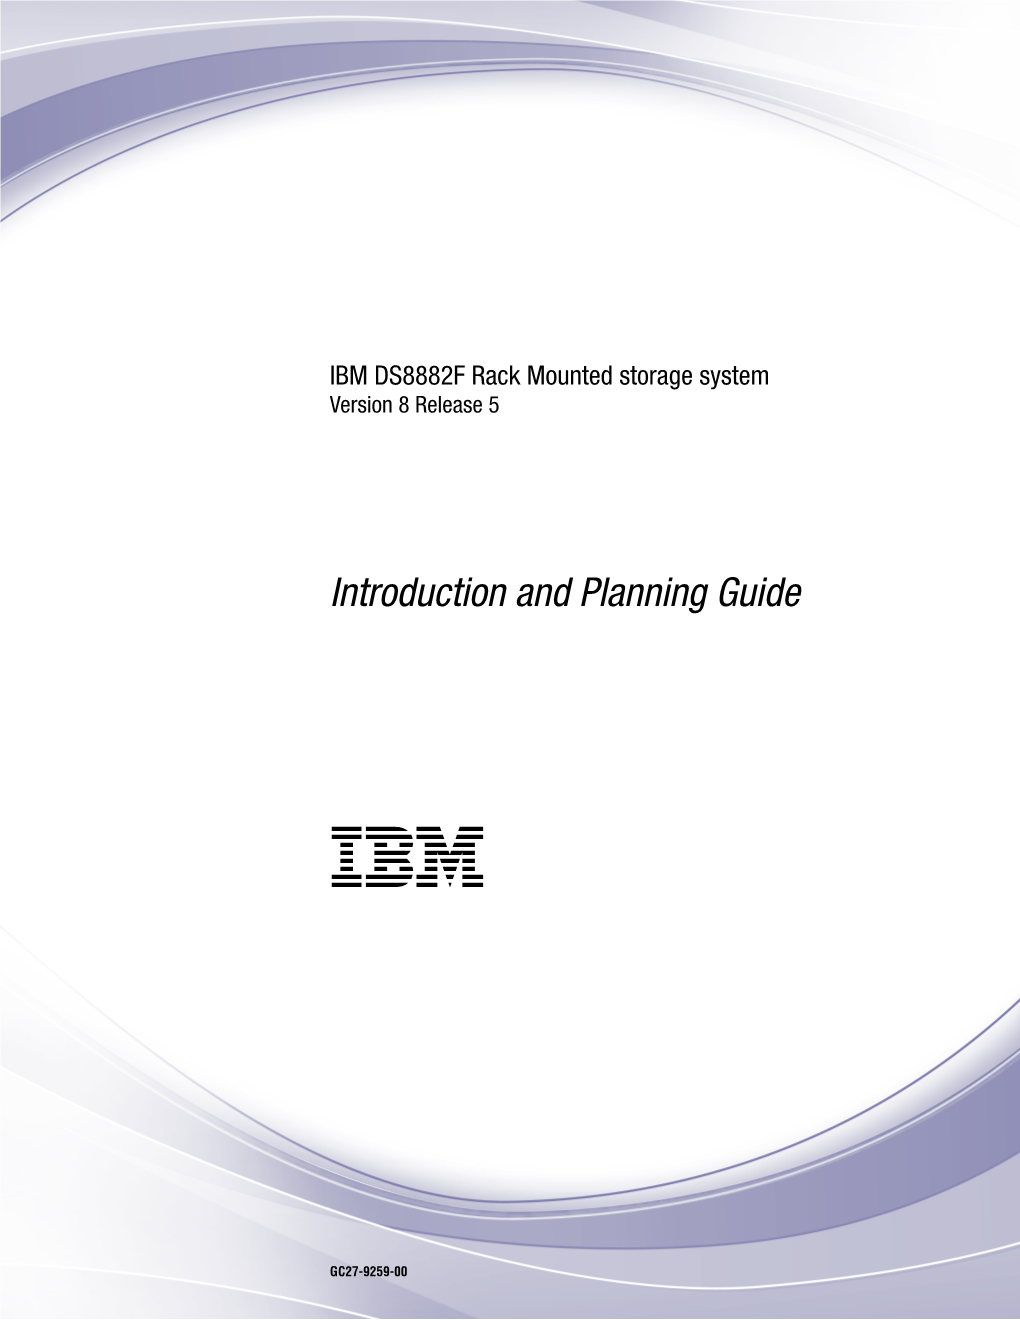 DS8882F Introduction and Planning Guide About This Book